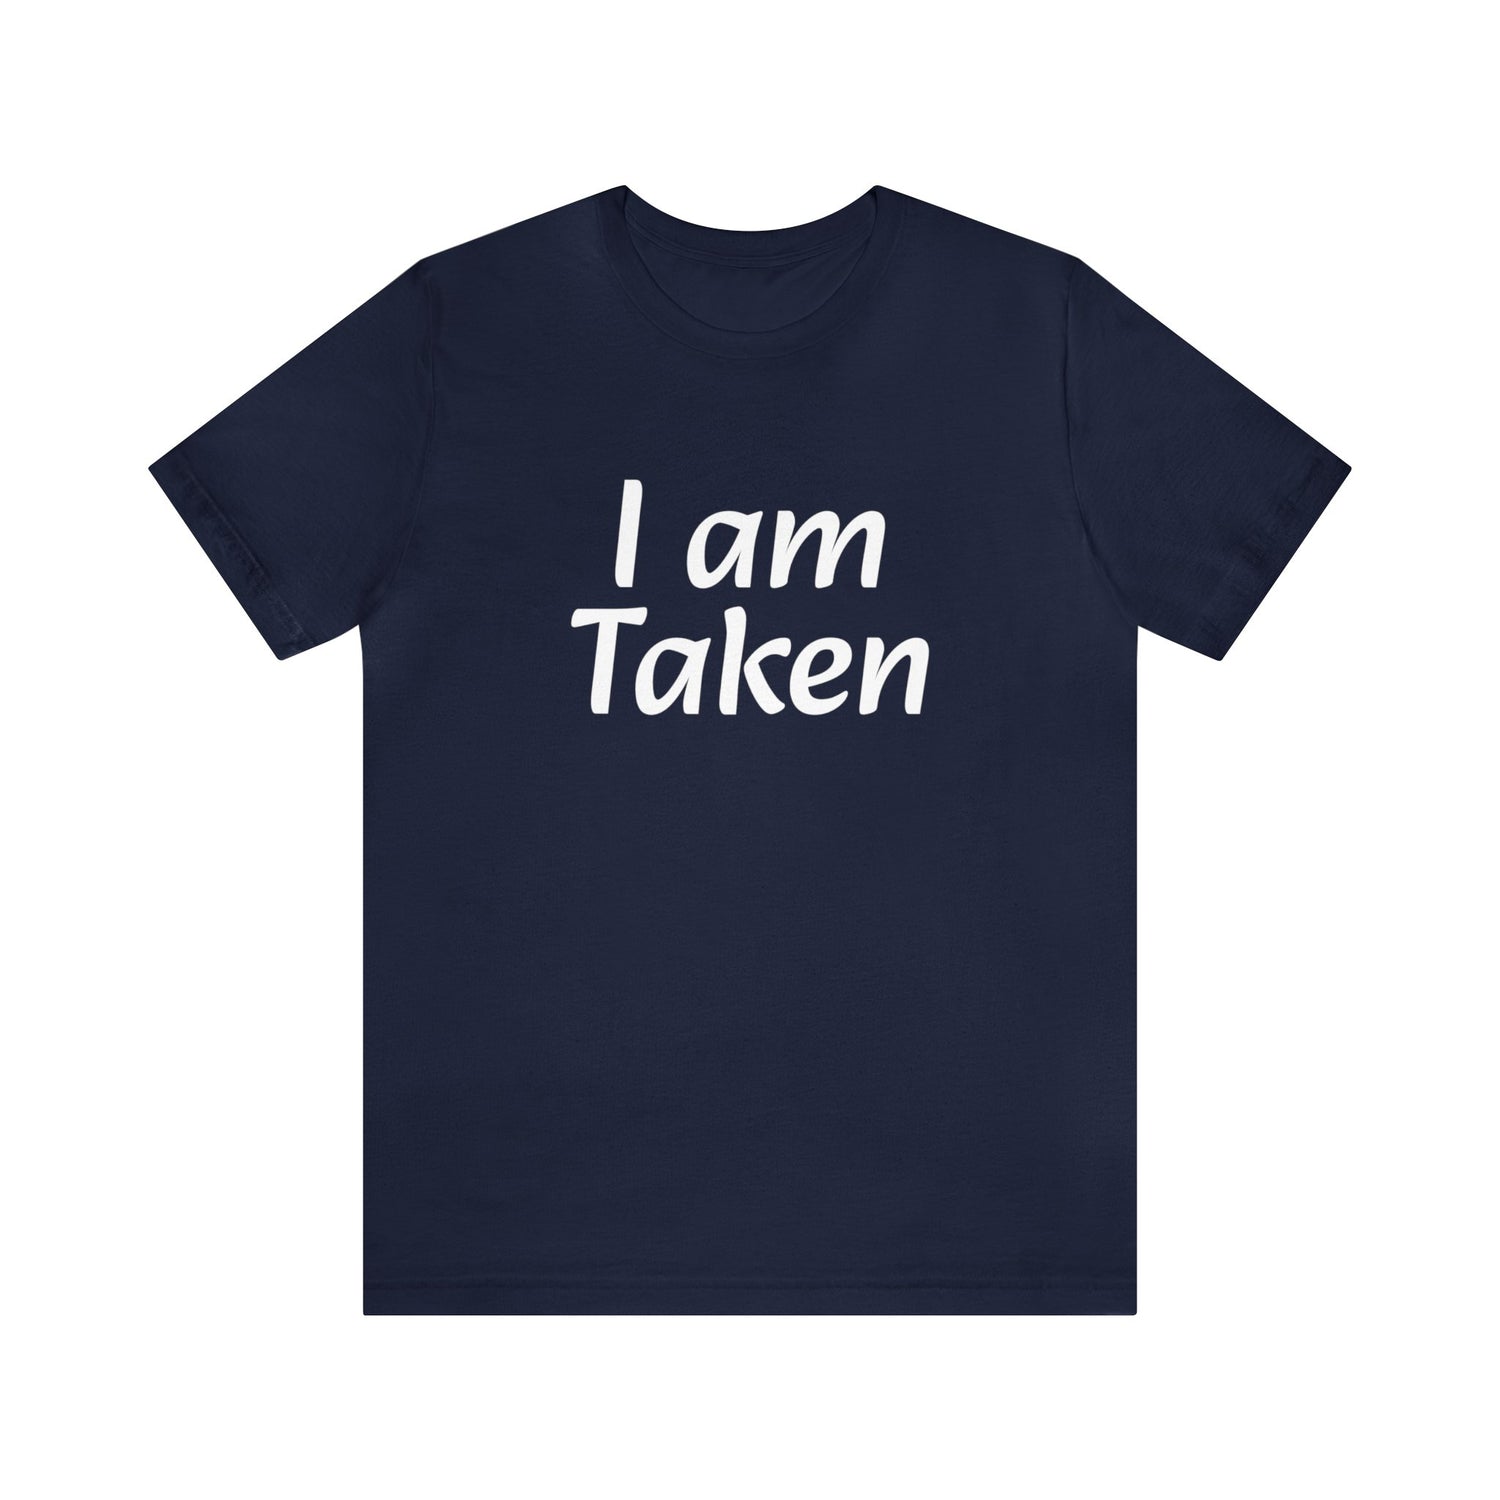 In Relationship T-Shirt | Couples T-Shirt | For Him or Her Navy T-Shirt Petrova Designs